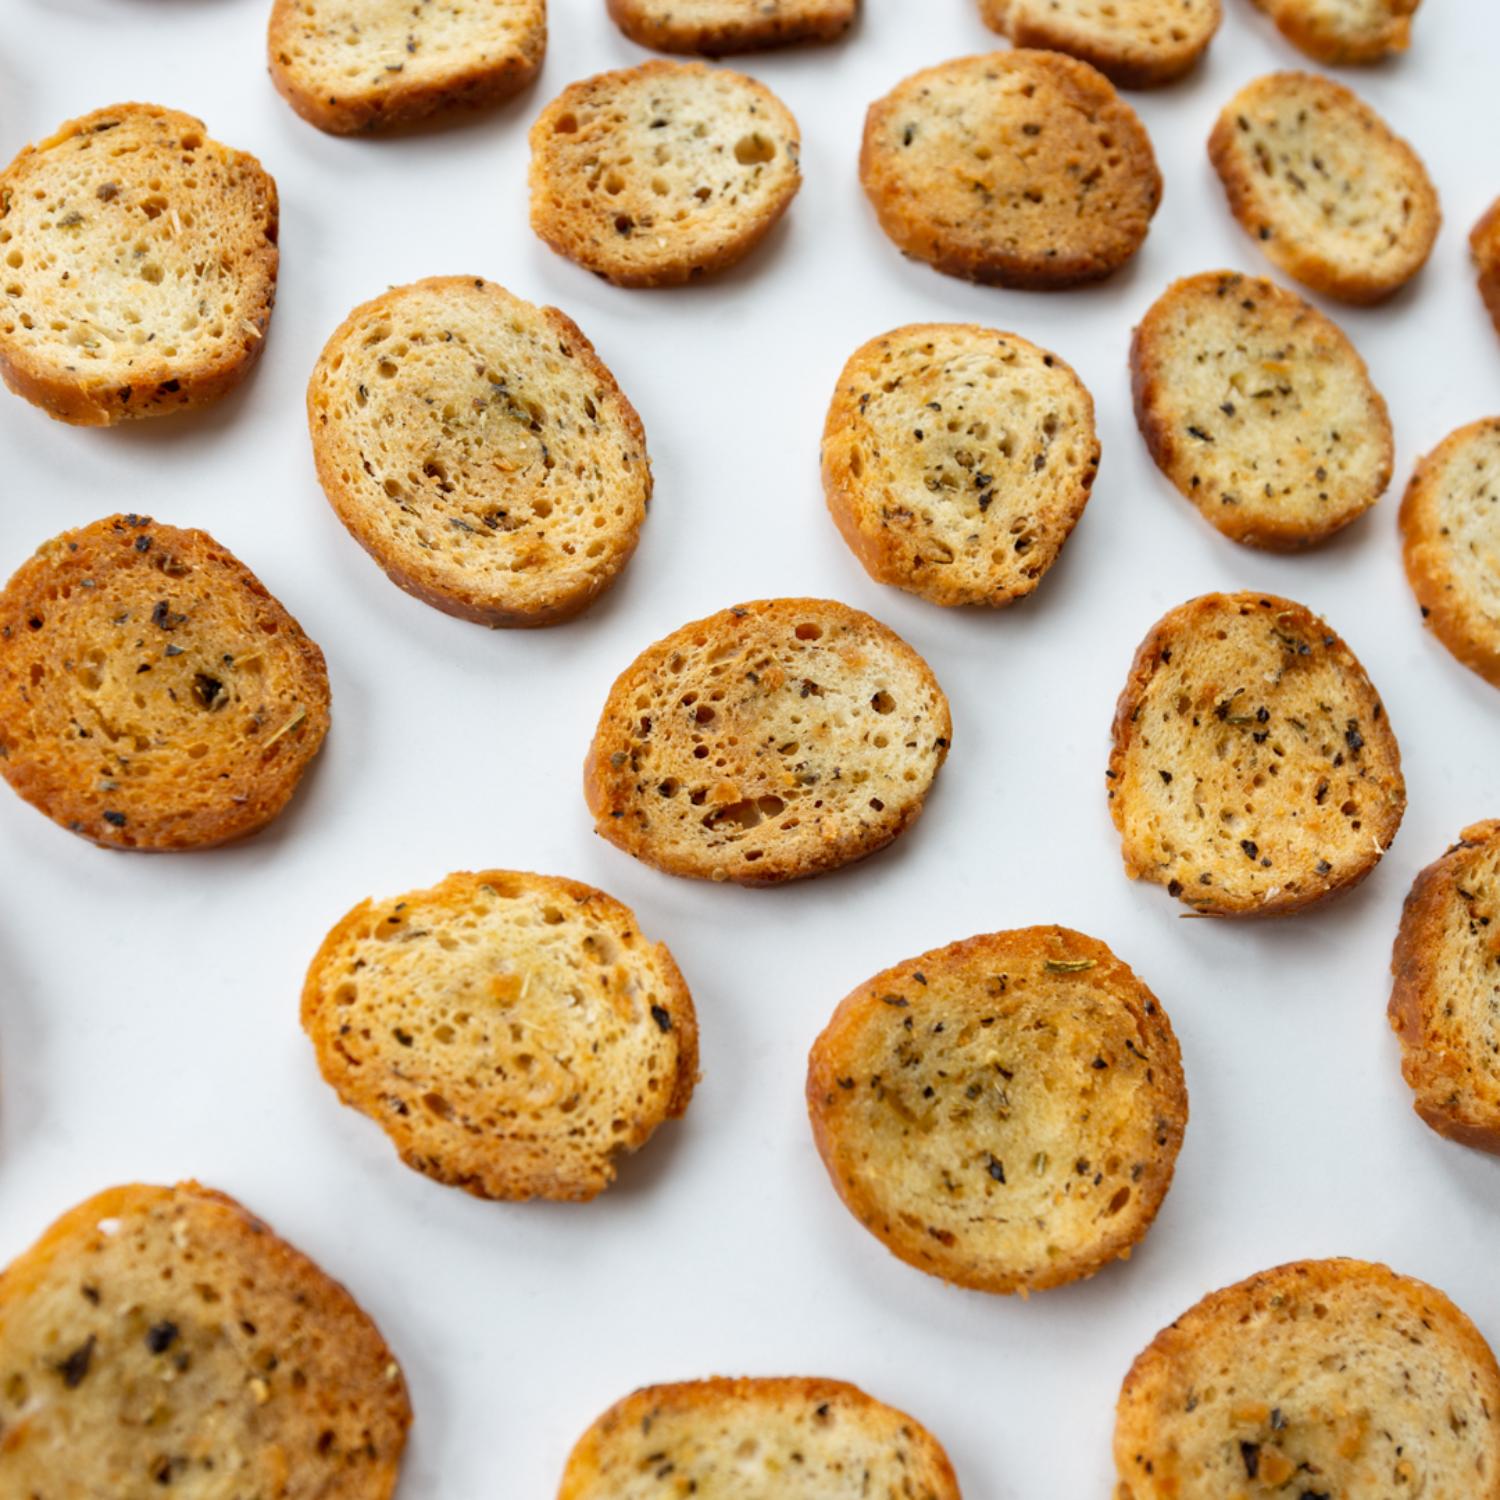 Garlic & Herb Bagel Chips spread out in single layer